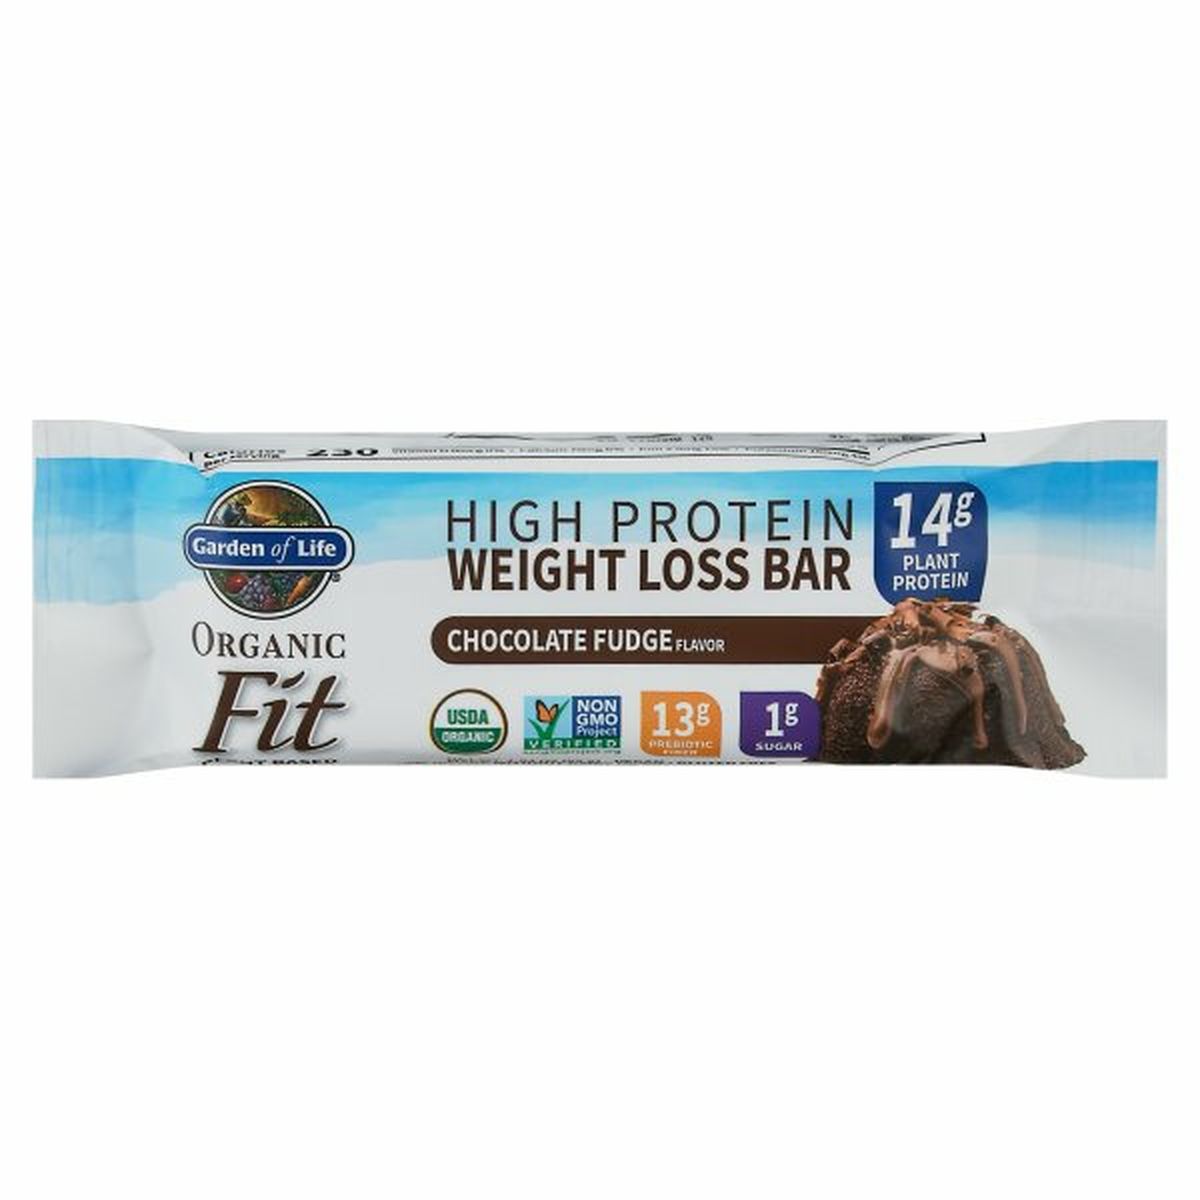 Calories in Garden of Life Weight Loss Bar, High Protein, Chocolate Fudge Flavor